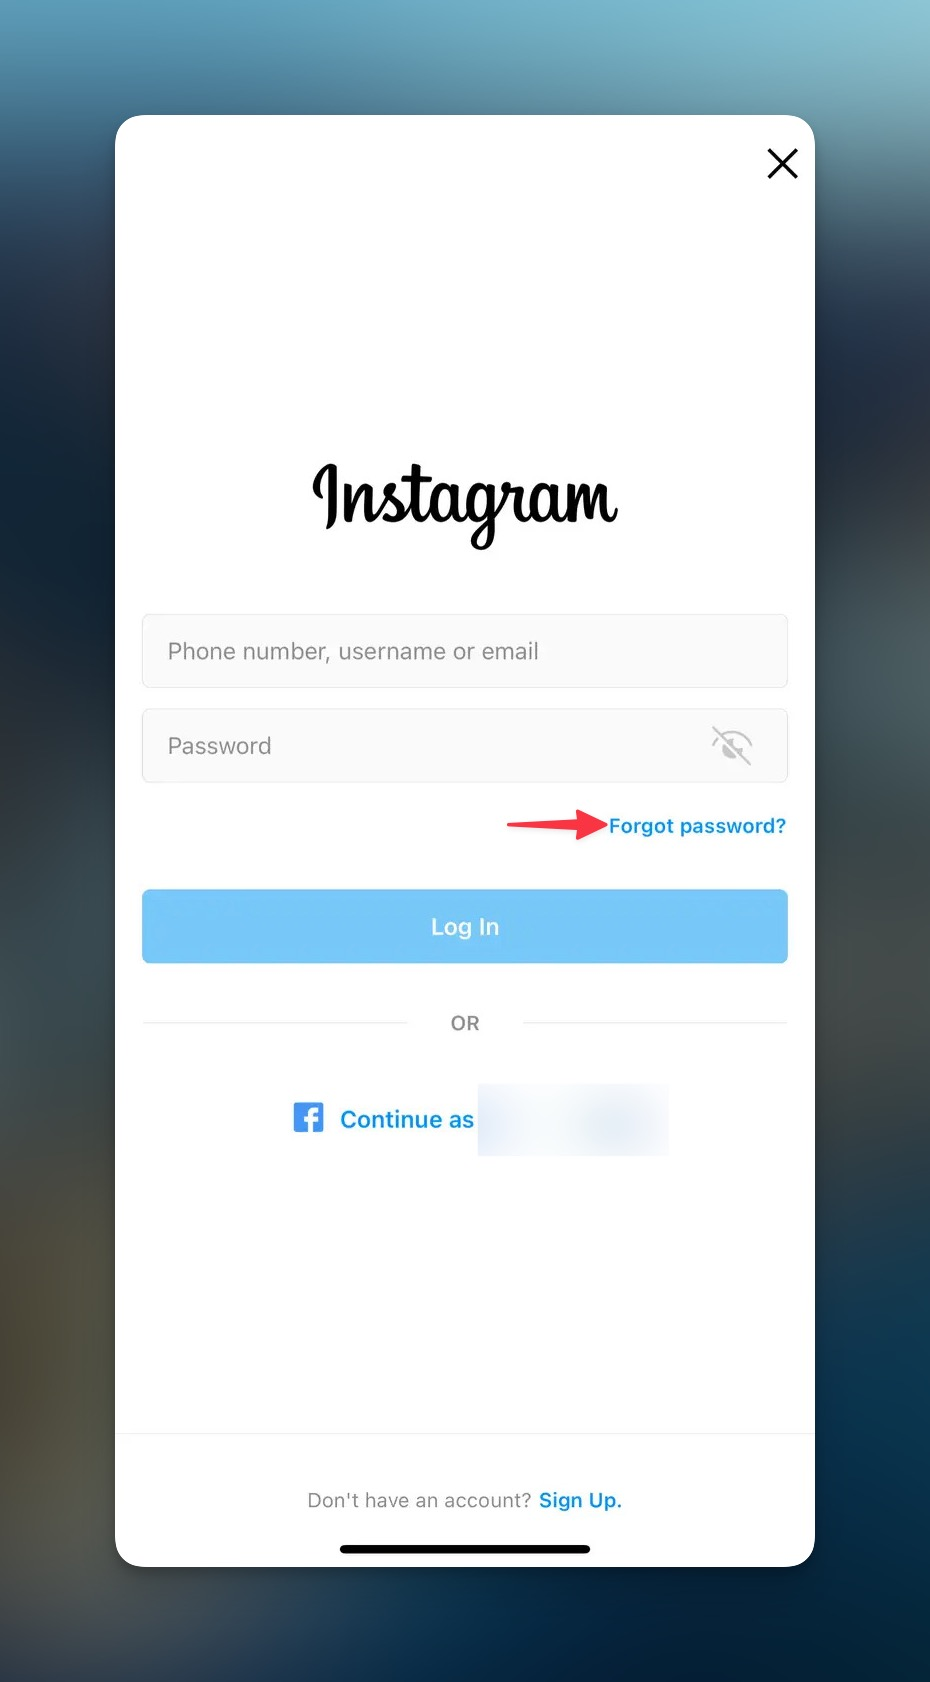 Remote.tools shows the login screen of Instagram to use forgot password to recover Instagram account